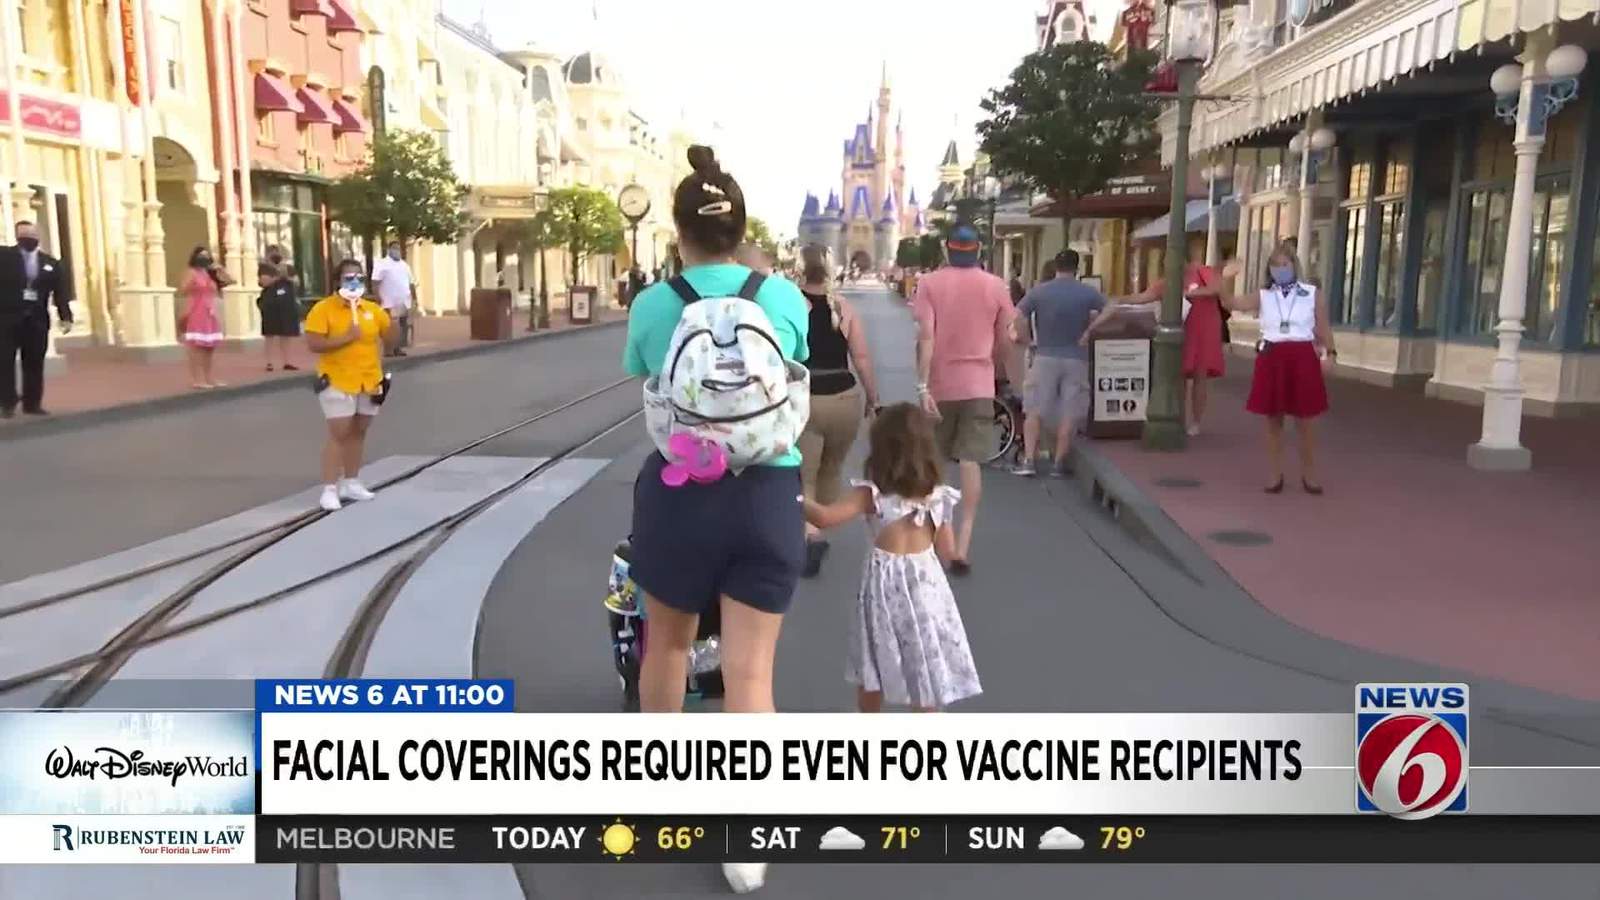 Disney: All parkgoers must wear masks, even if they’re vaccinated for COVID-19